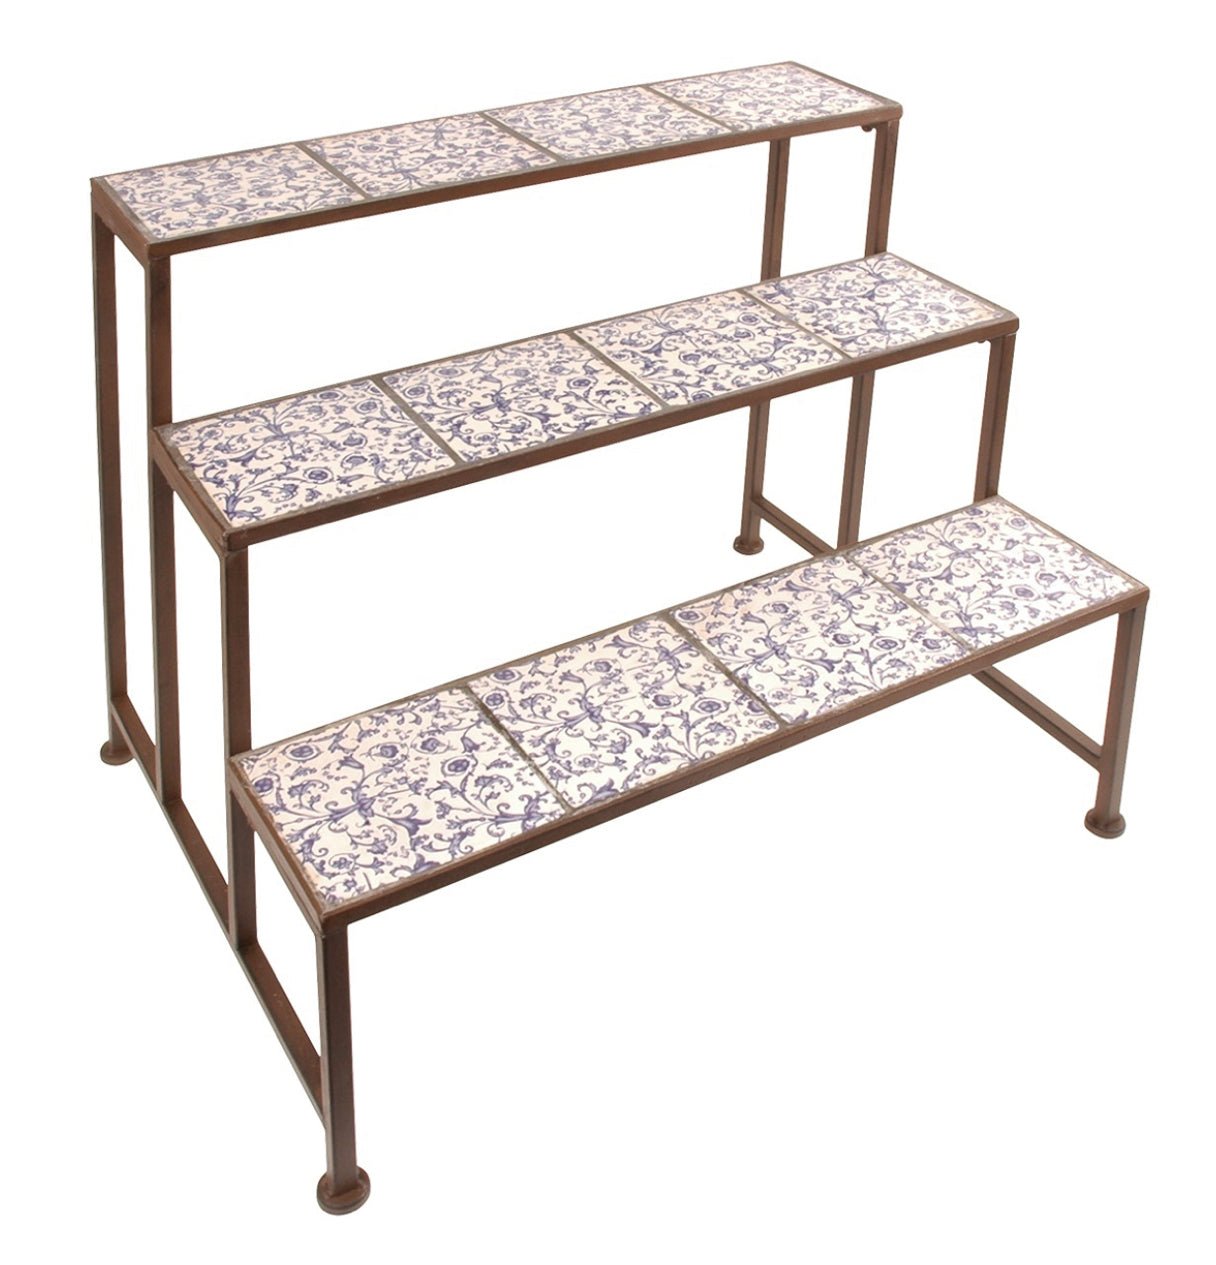 Aged Blue 3 Tier Plant Stand - The Flower Crate